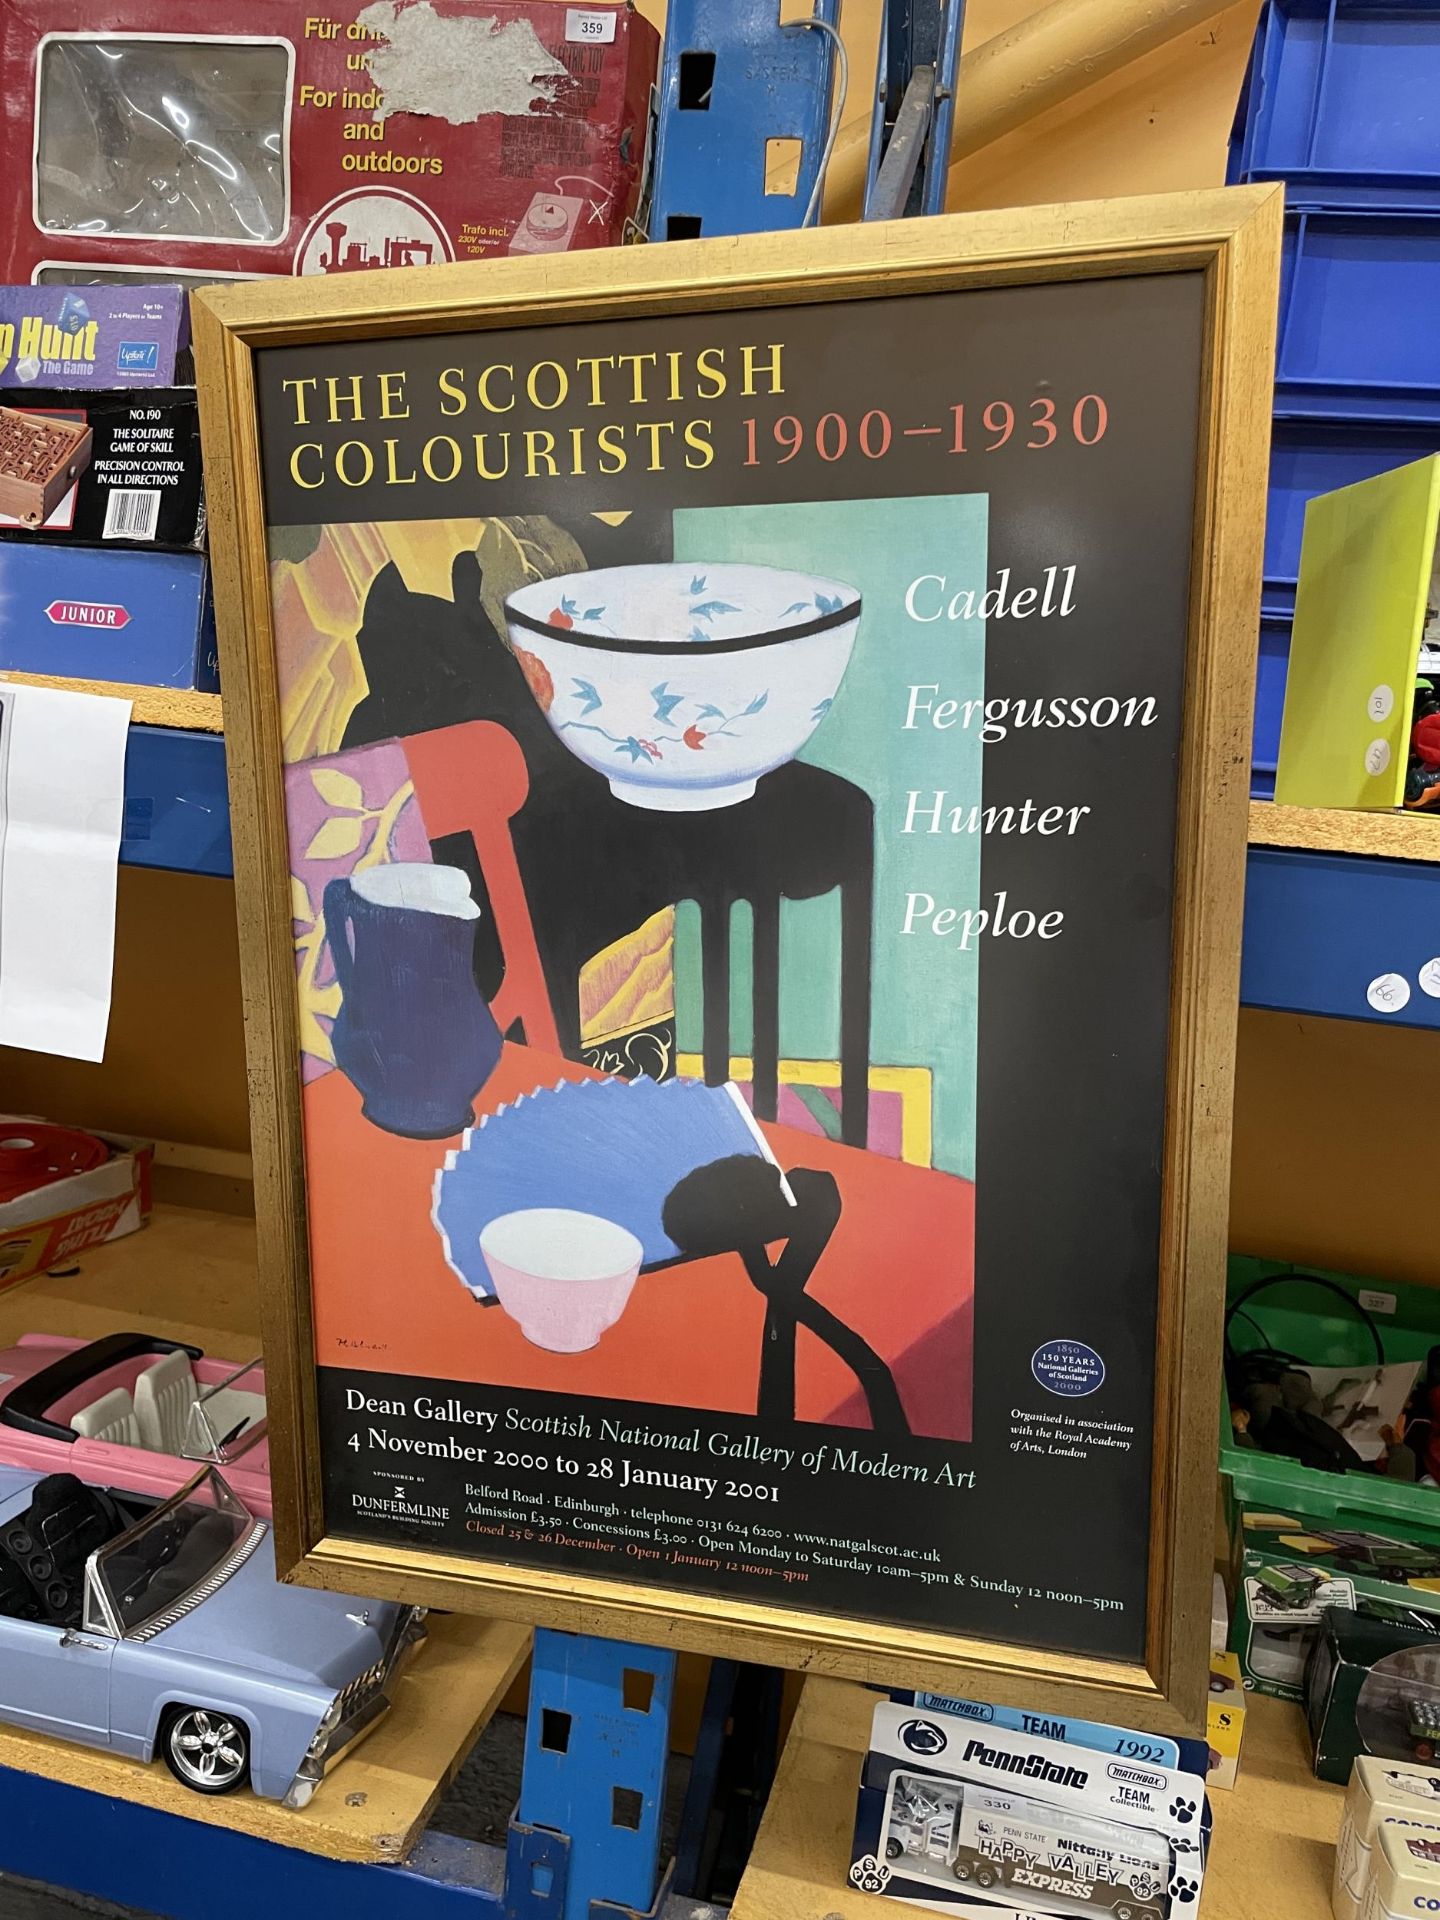 'THE SCOTTISH COLOURISTS 1900-1930' FRAMED POSTER FROM THE SCOTTISH NATIONAL GALLERY OF MODERN ART